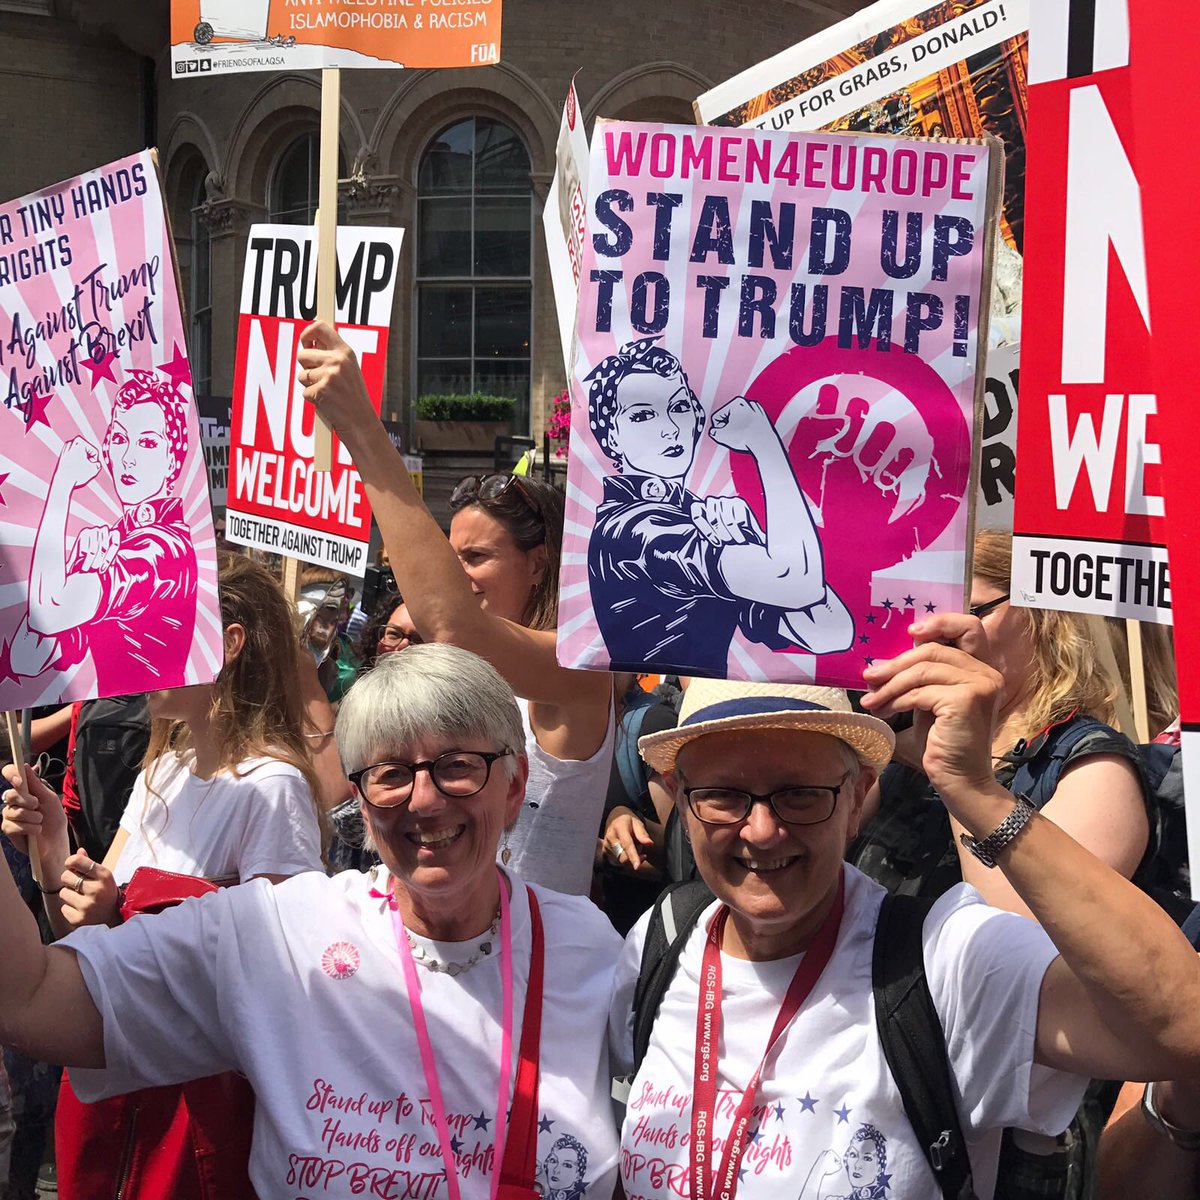 Wonderful to see ⁦@Women_4_Europe⁩ and their beautiful signs today!! #AgainstTrump #AgainstBrexit ⁦@BestForBritain⁩